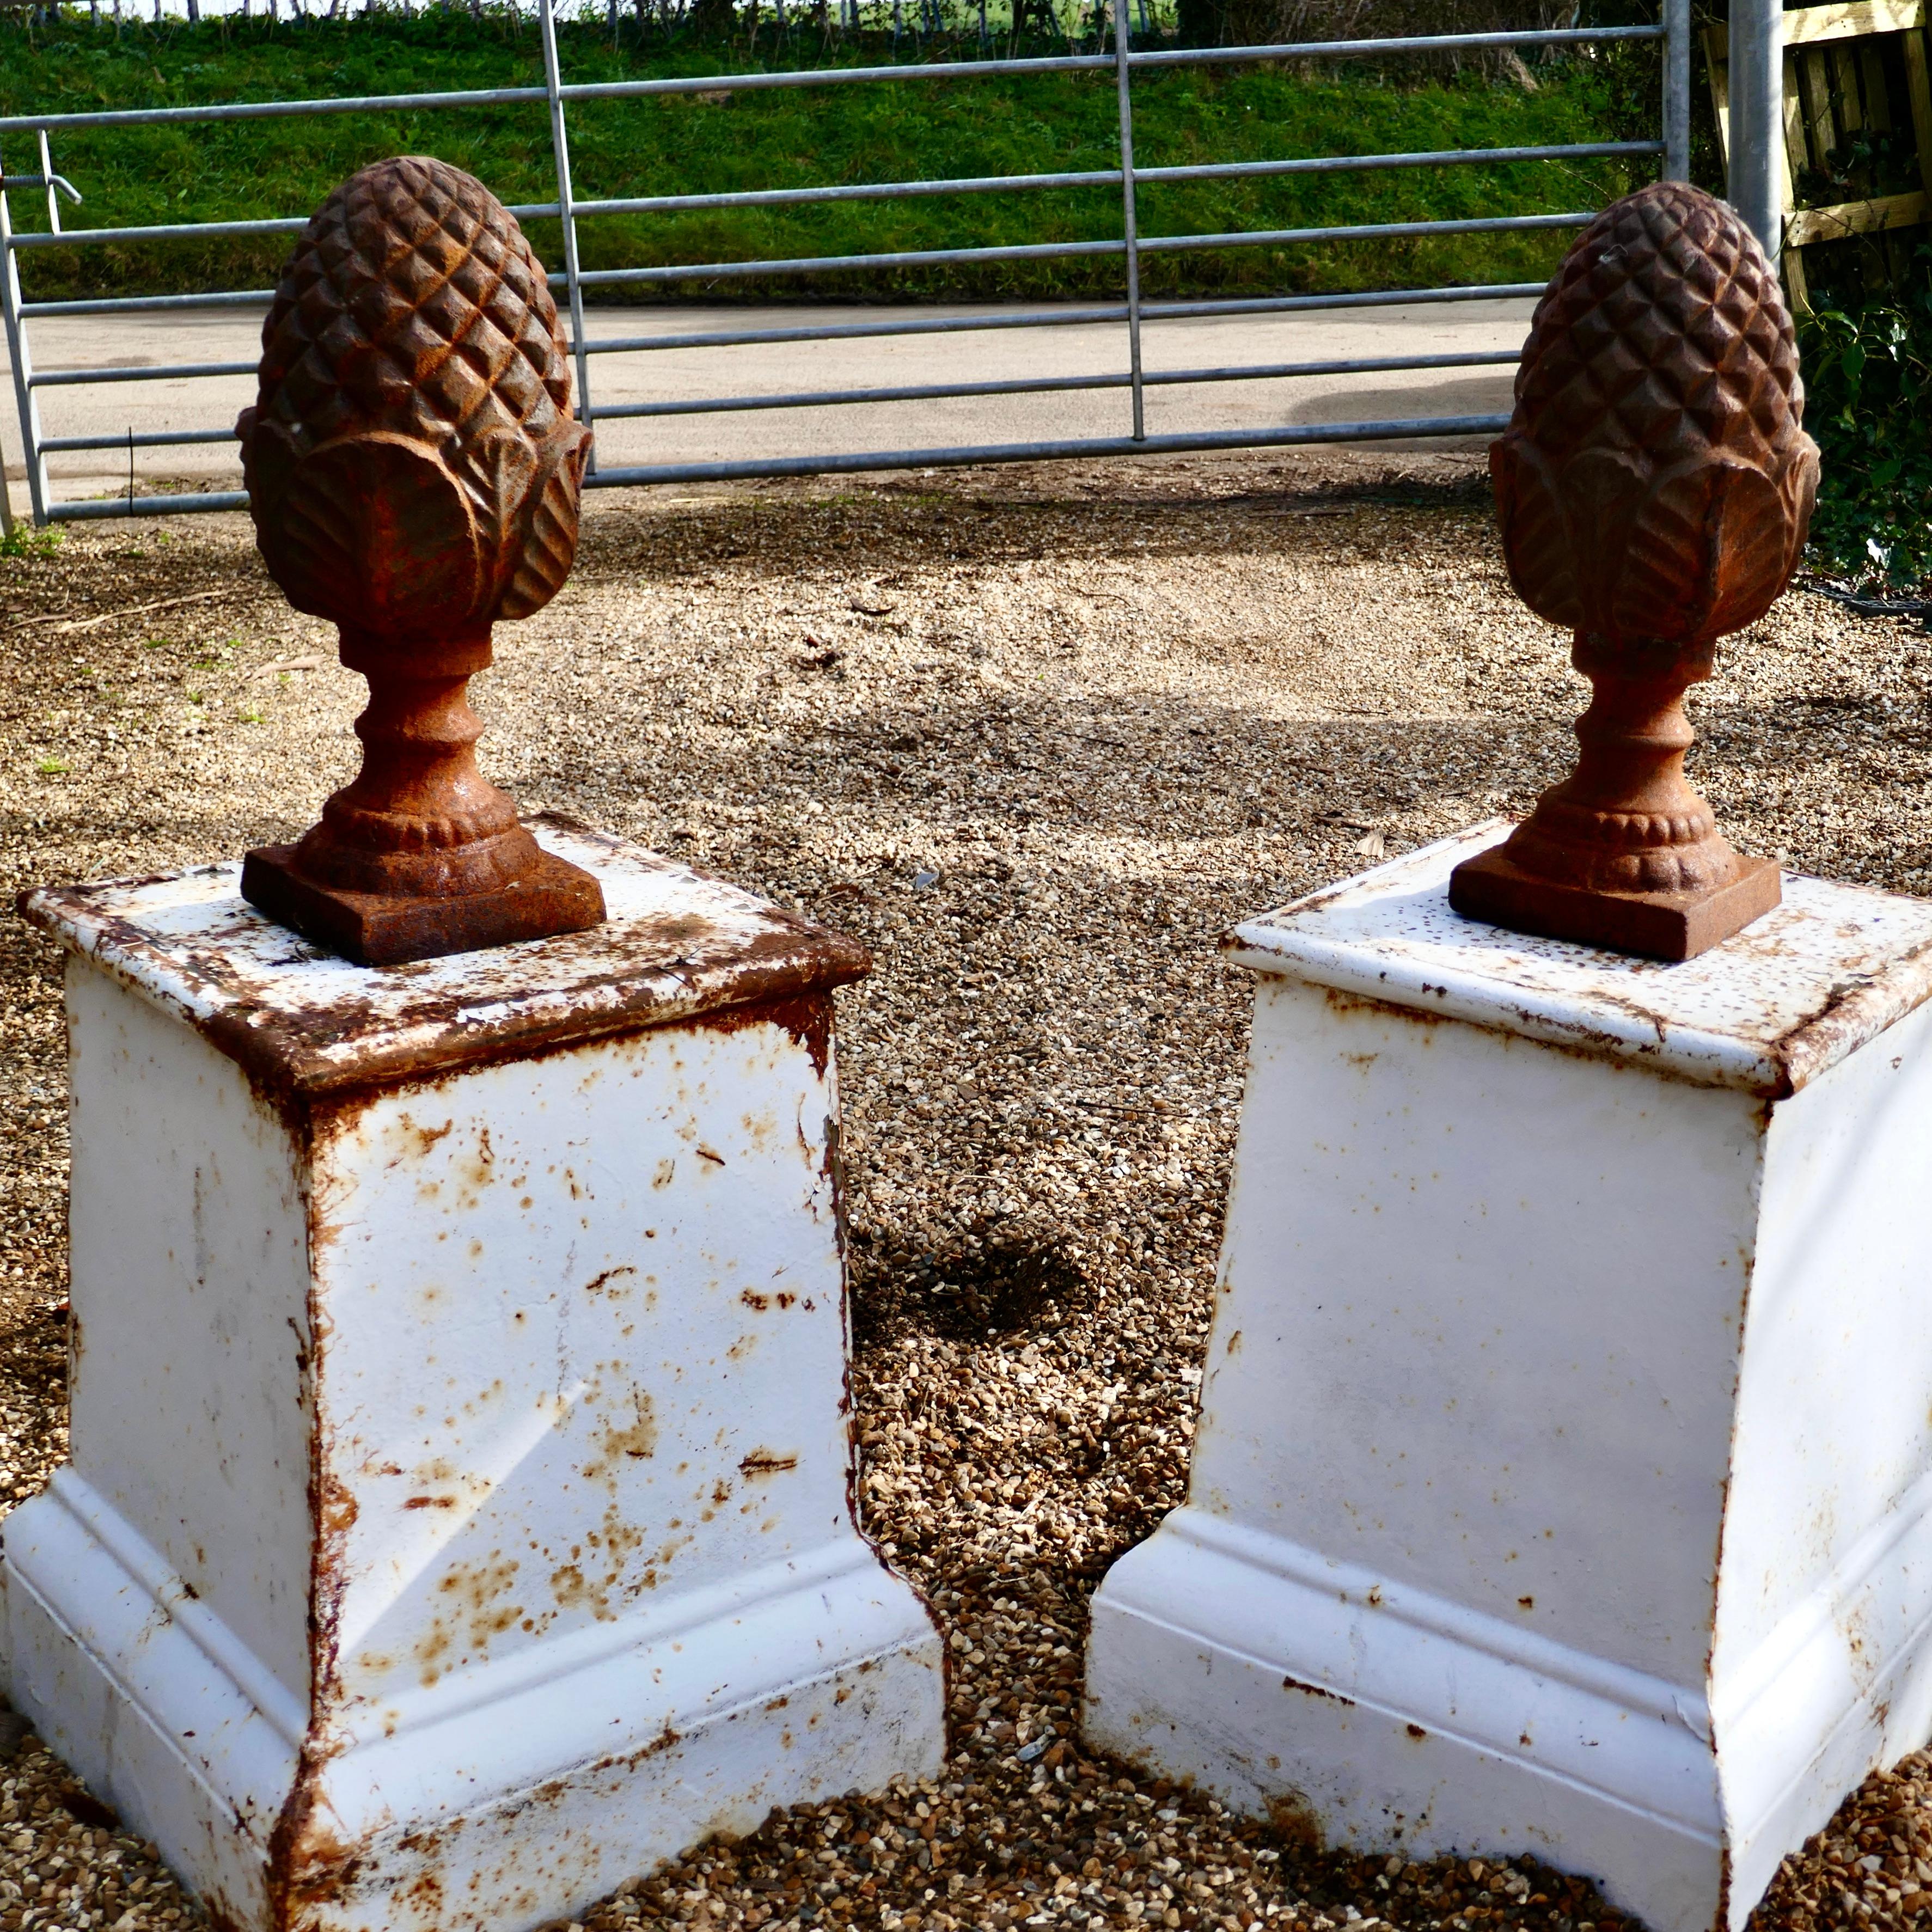 Pair of iron pine cone gate post finials

An elegant pair of traditional weathered iron gate pier finials .
Often called Pineapples, Pine Cones or even Artichokes
This is a superb pair of Gate Post finials in good weathered condition as viewed